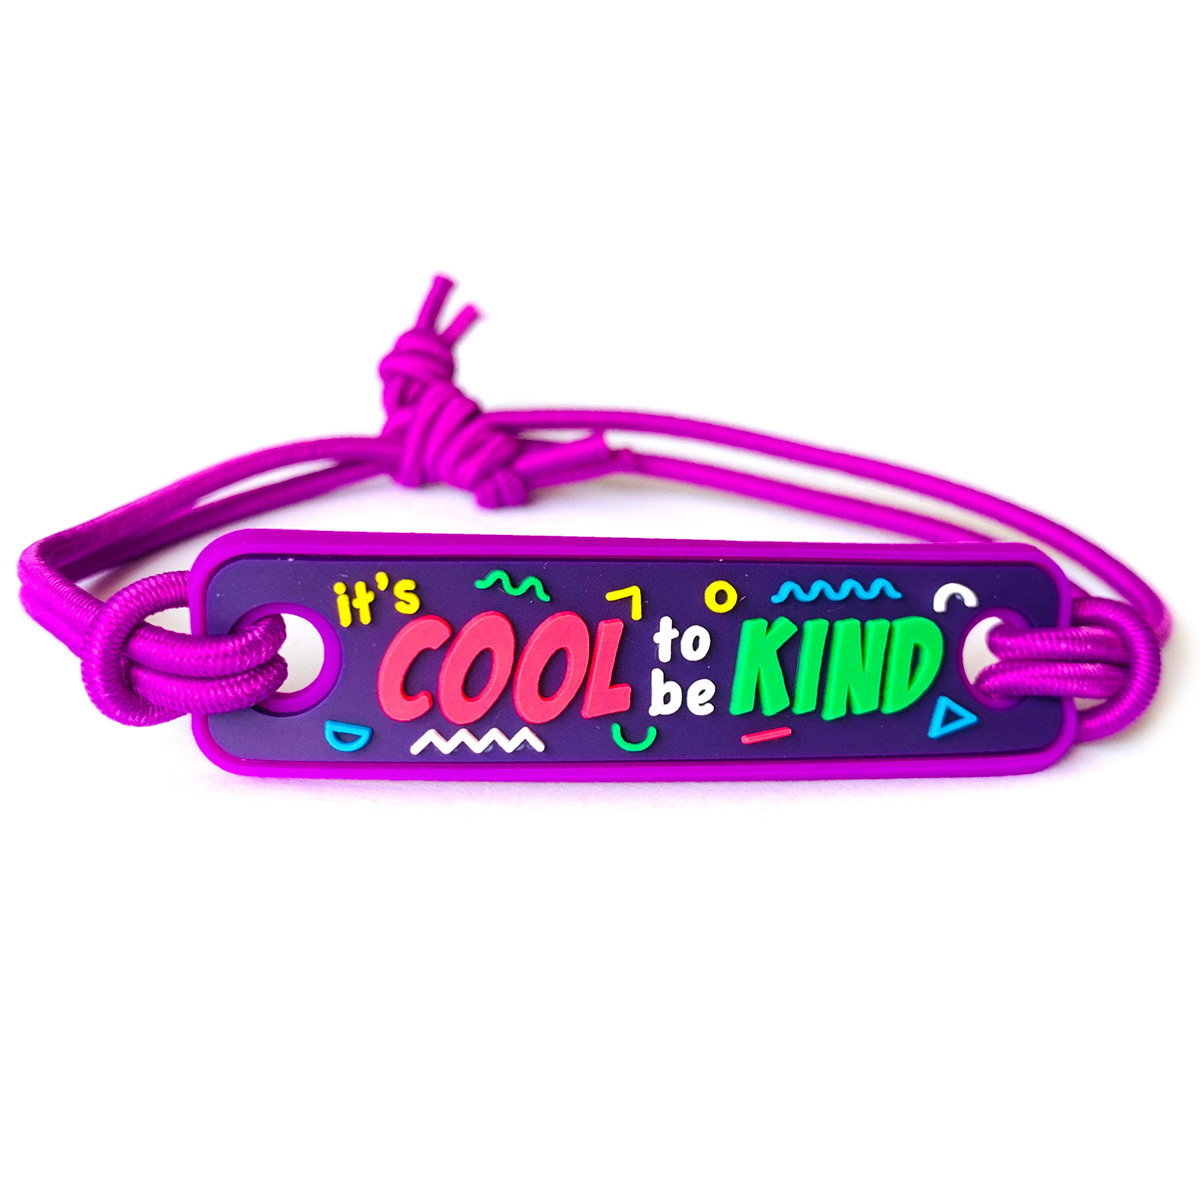 3D Bands - It's Cool to be Kind